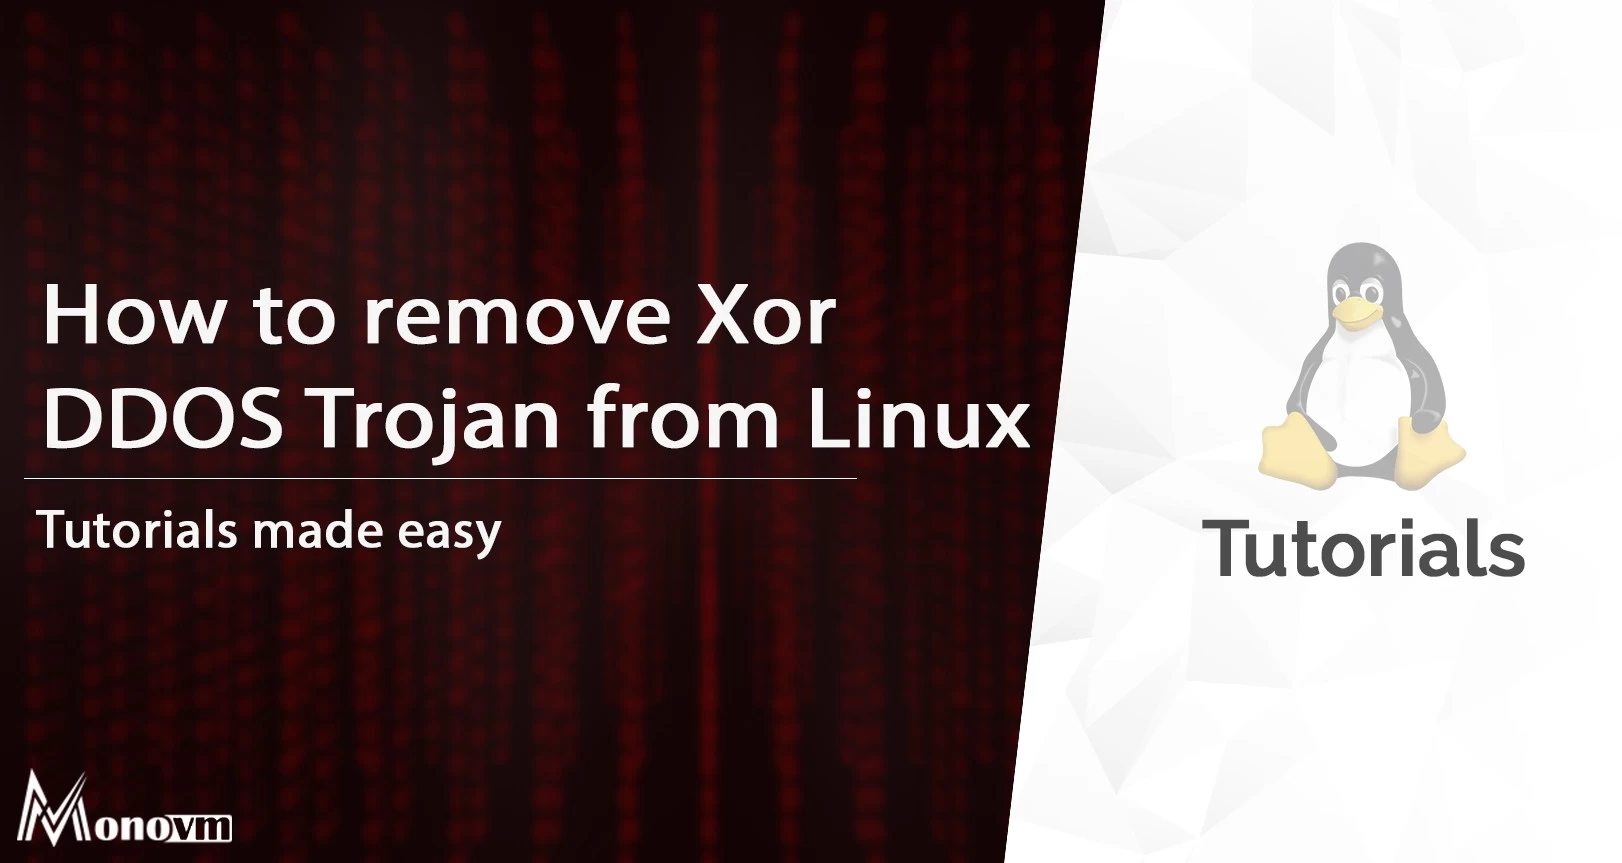 How to Remove Xor DDos Trojan from Linux